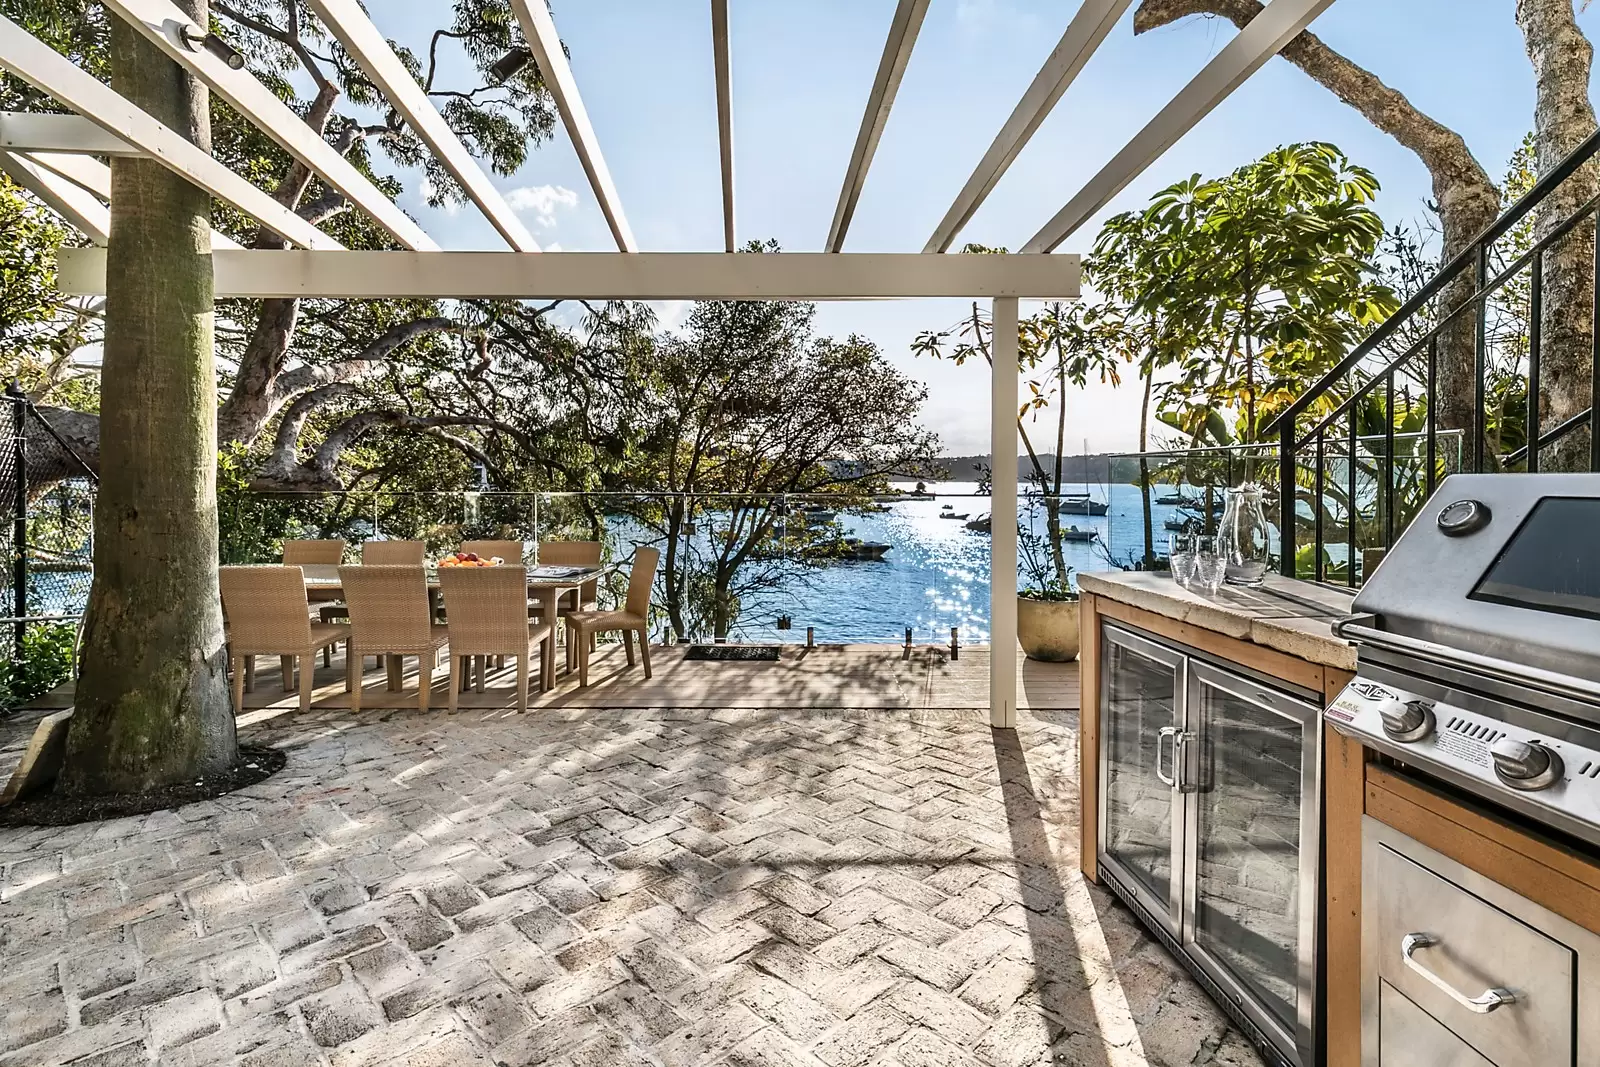 Photo #10: 18 The Crescent, Vaucluse - Sold by Sydney Sotheby's International Realty